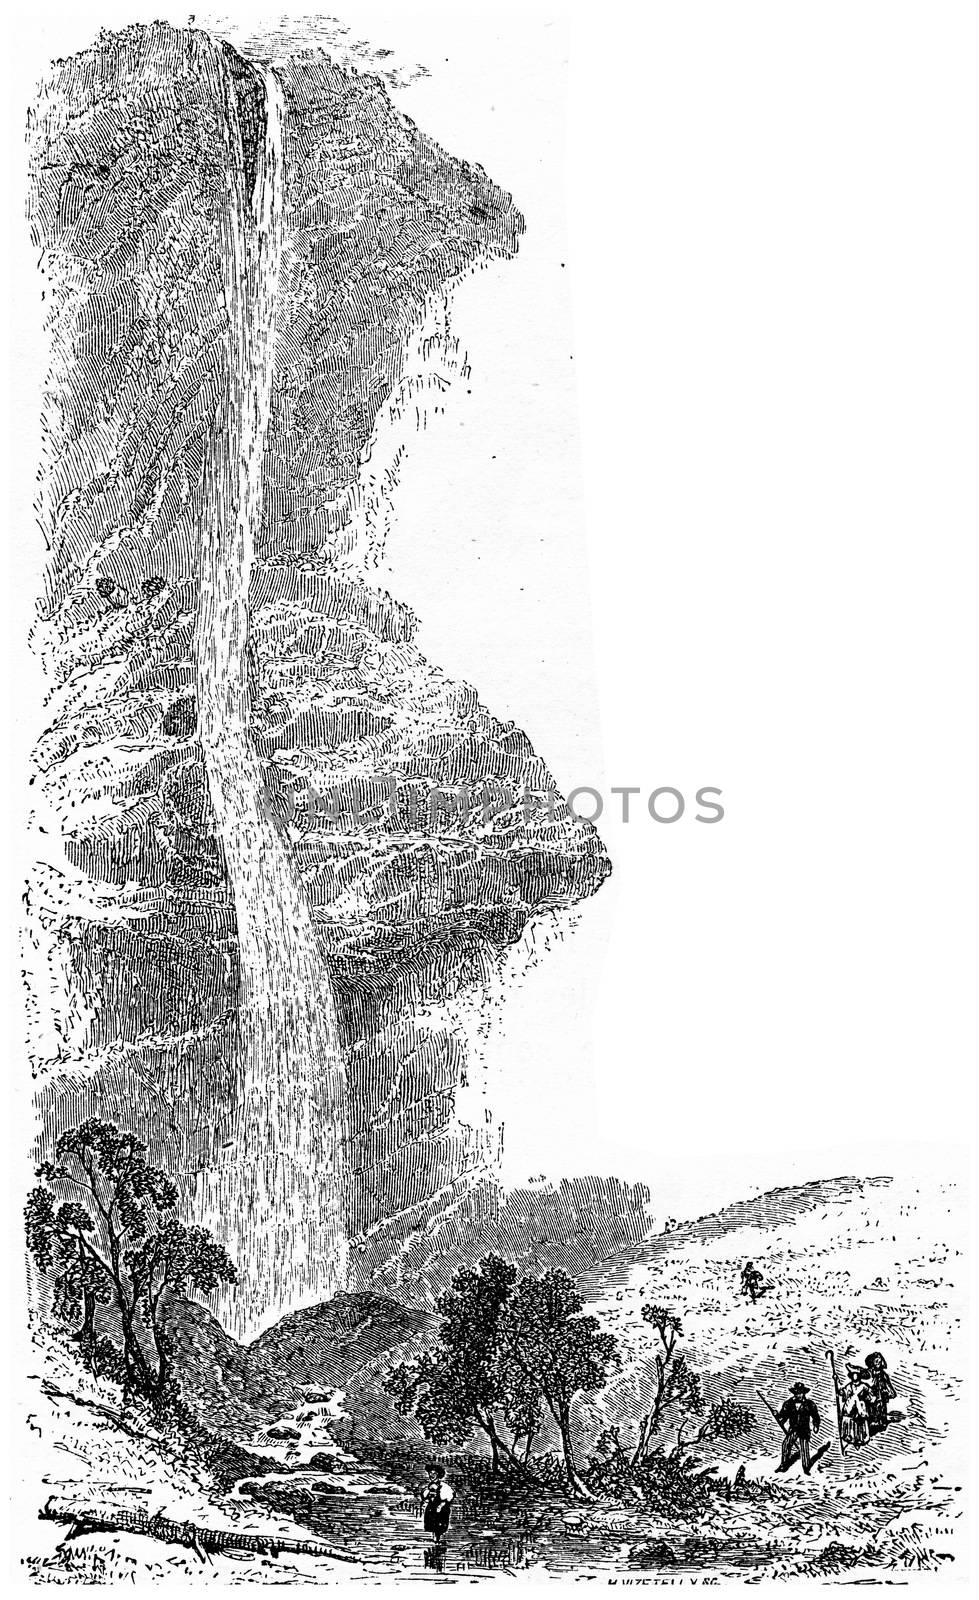 Staubbach Falls, vintage engraving. by Morphart